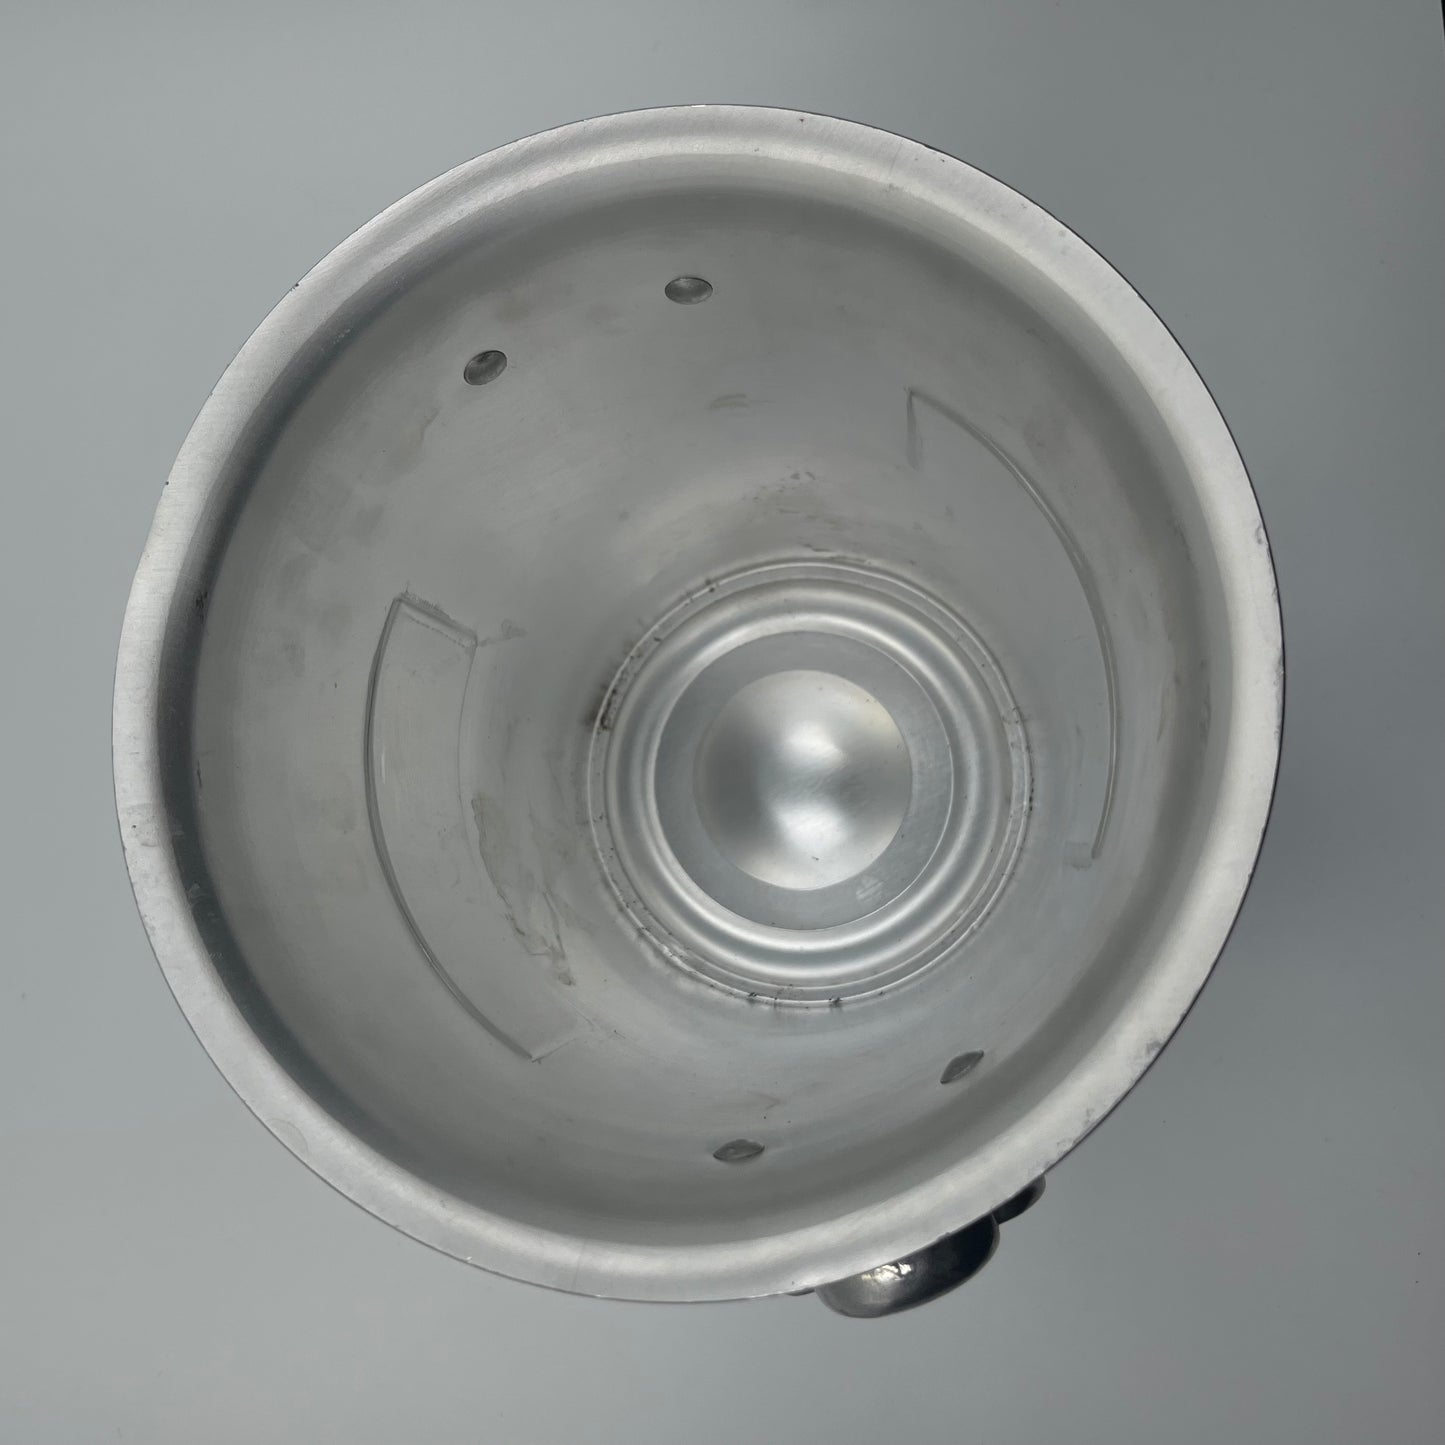 Billecart-Salmon Champagne Bucket. From the top looking into the bucket